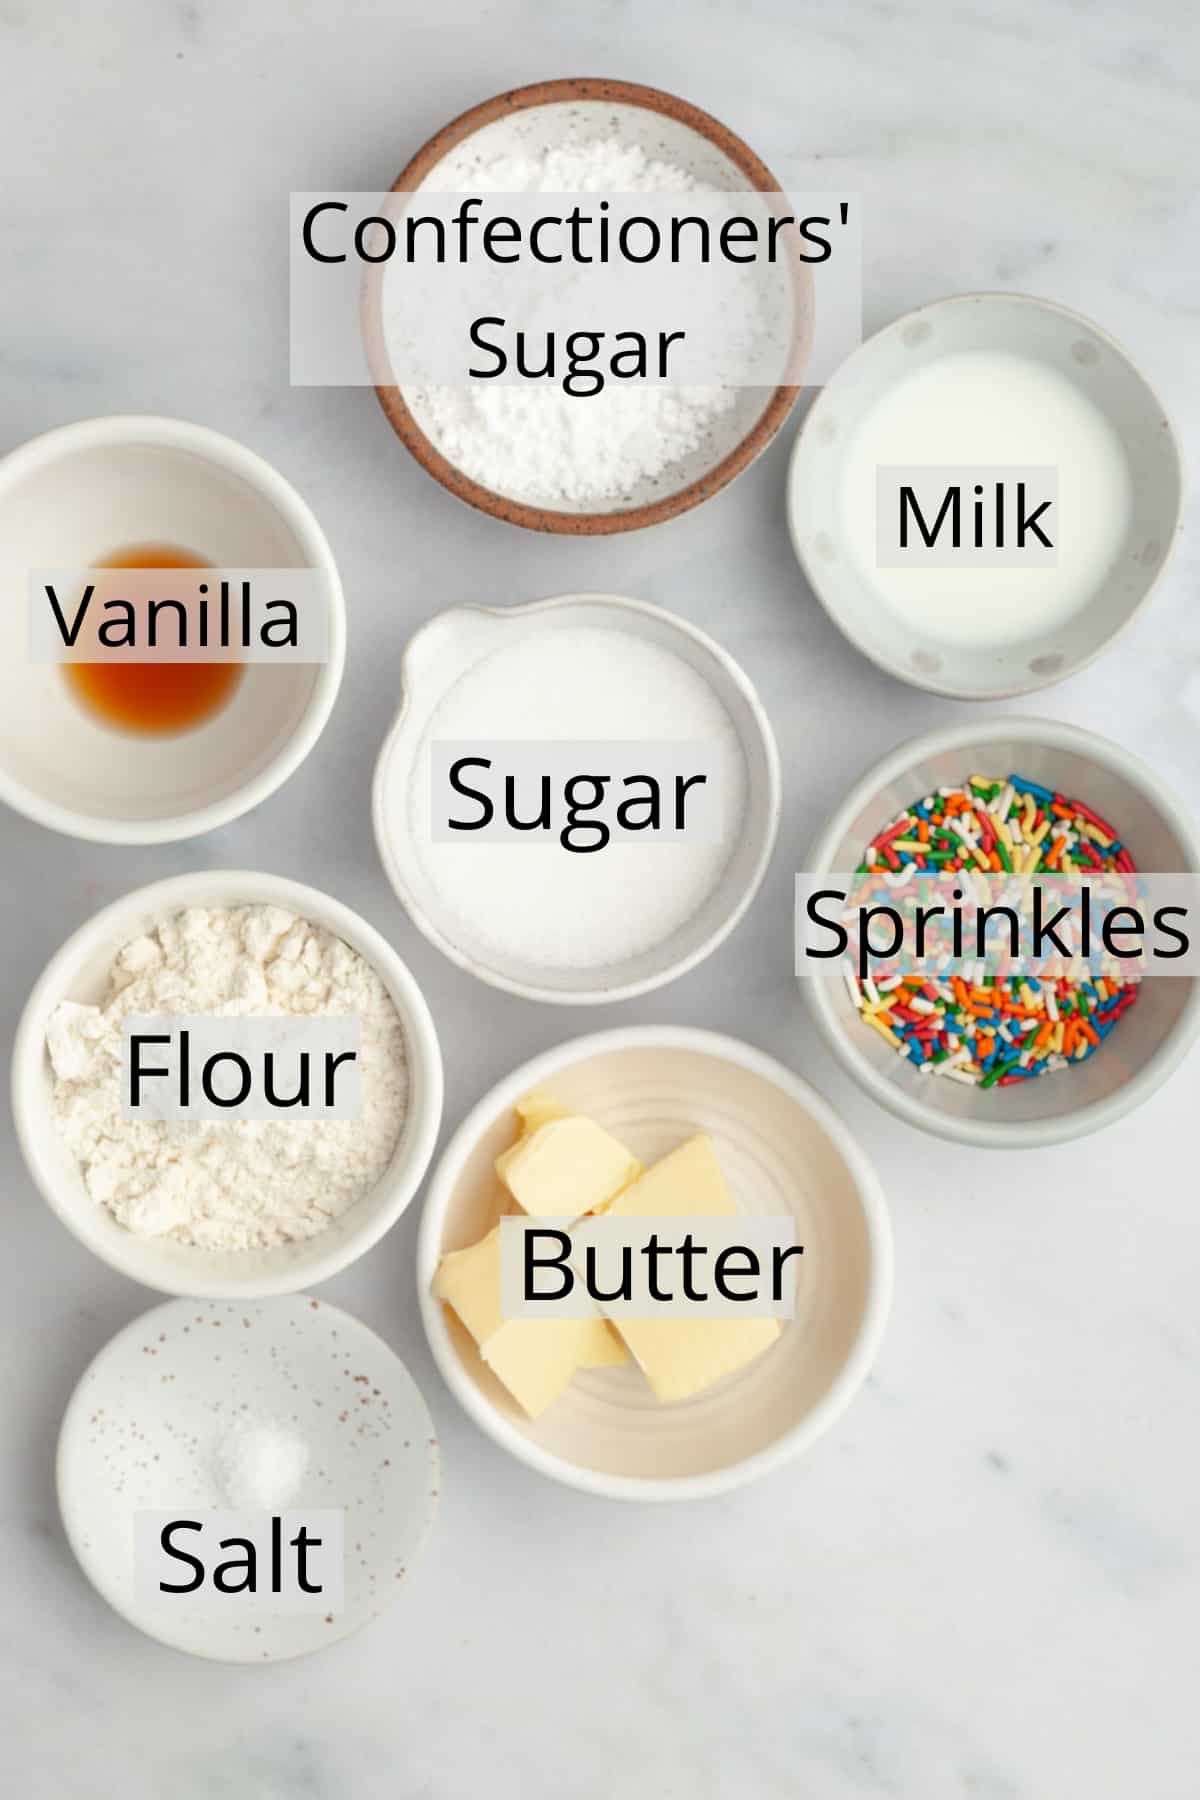 All the ingredients needed to make edible sugar cookie dough, weighed out into small bowls.